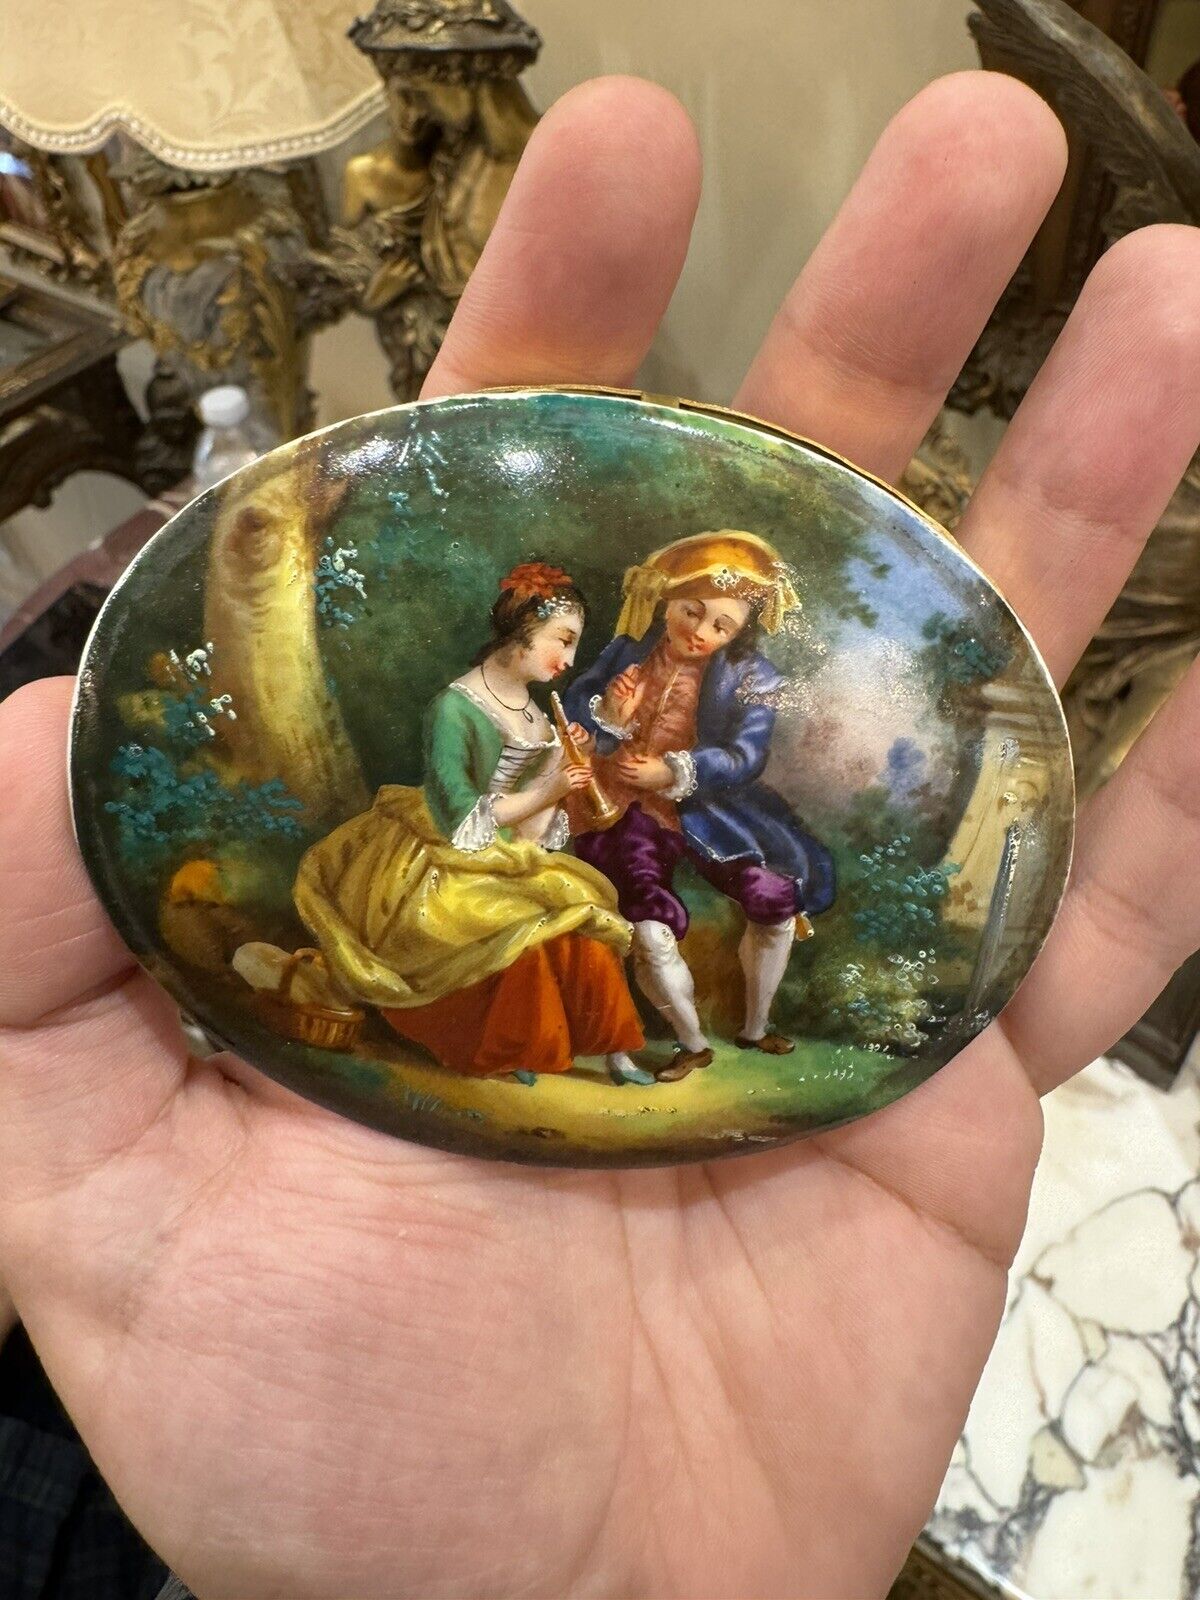 A Lovely Miniature Antique Oval Porcelain Plaque Painting Couple Playing Music